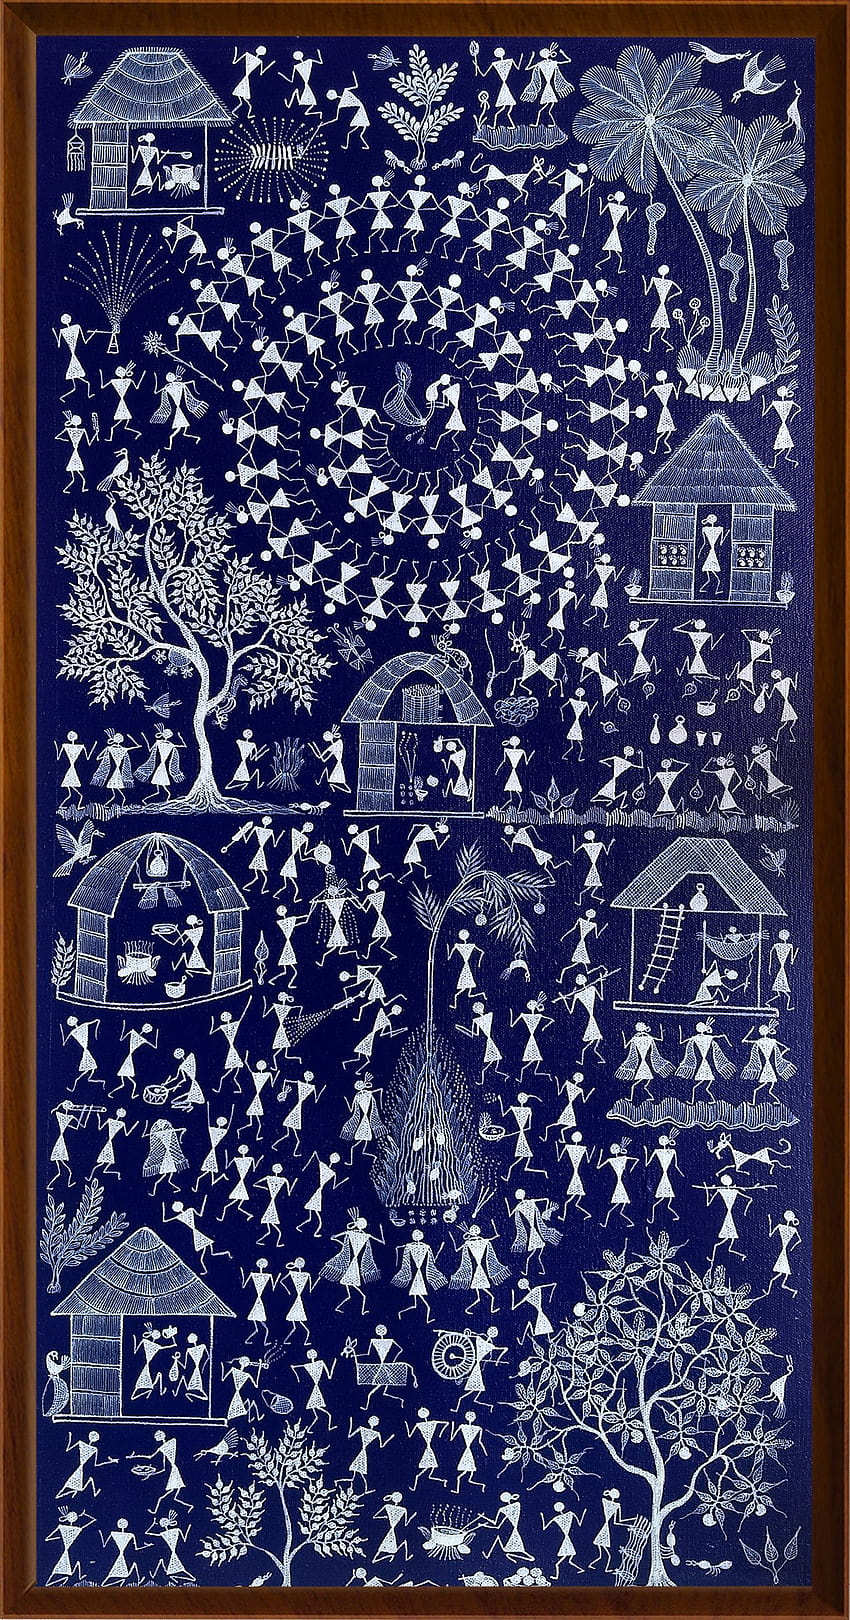 Tribal Warli Painting, Handmade Indian Traditional painting on Canvas with Tribal Festival Celebration 60x30 cms HD phone wallpaper